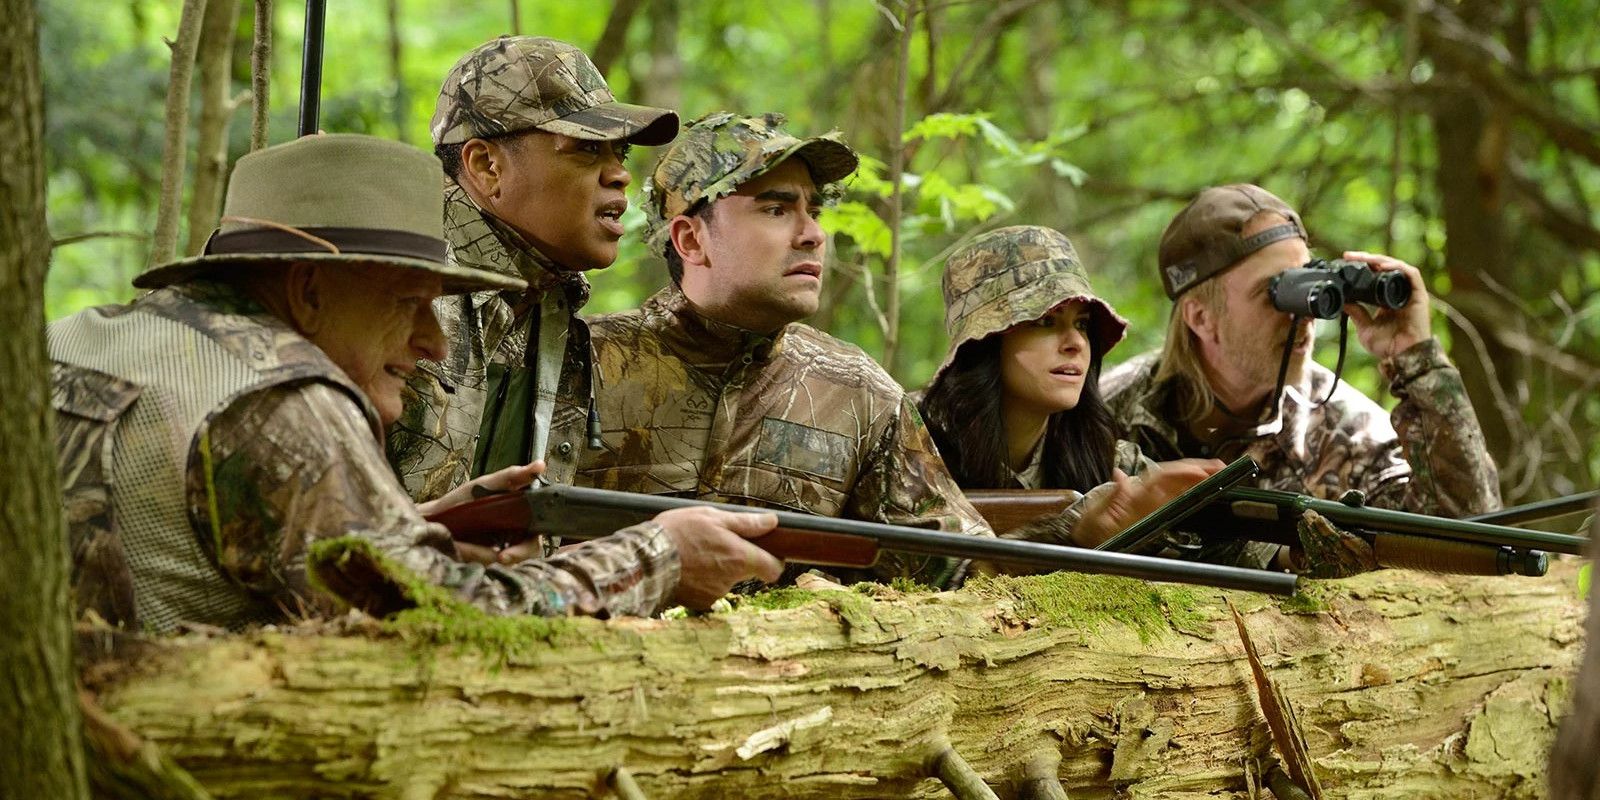 david, stevie, roland, and others hunting a turkey in schitt's creek